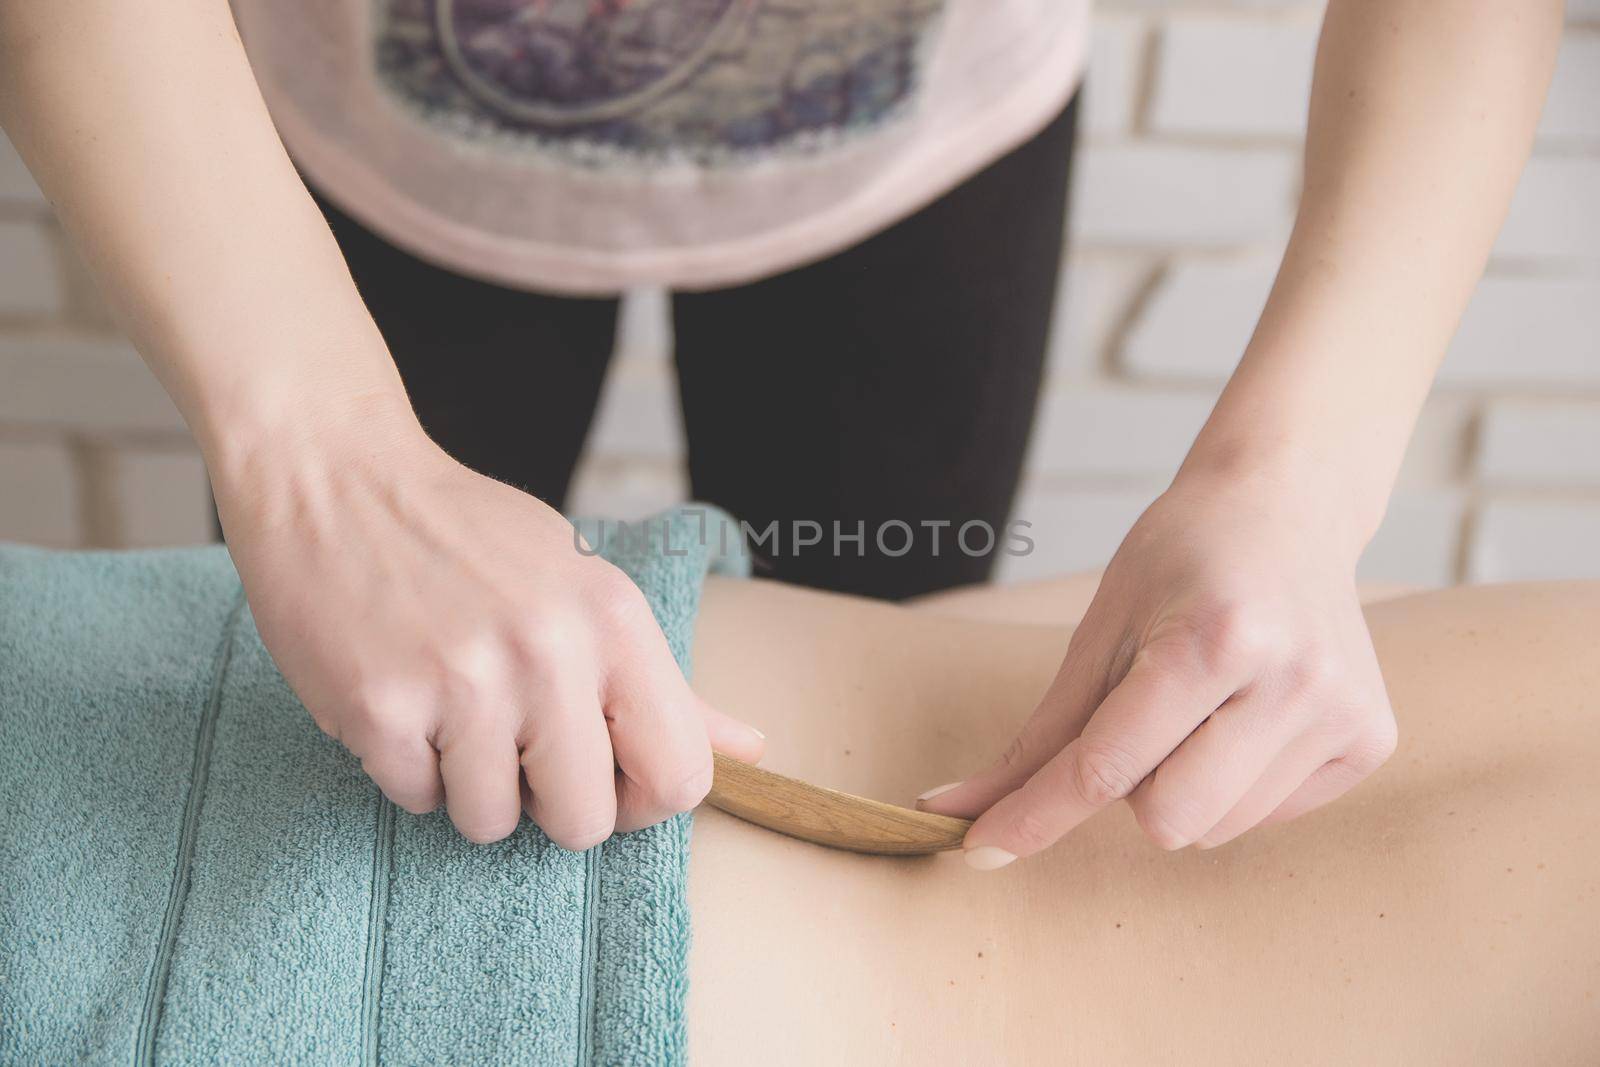 therapeutic back massage in the spa salon makes the girl a massage with wooden knives